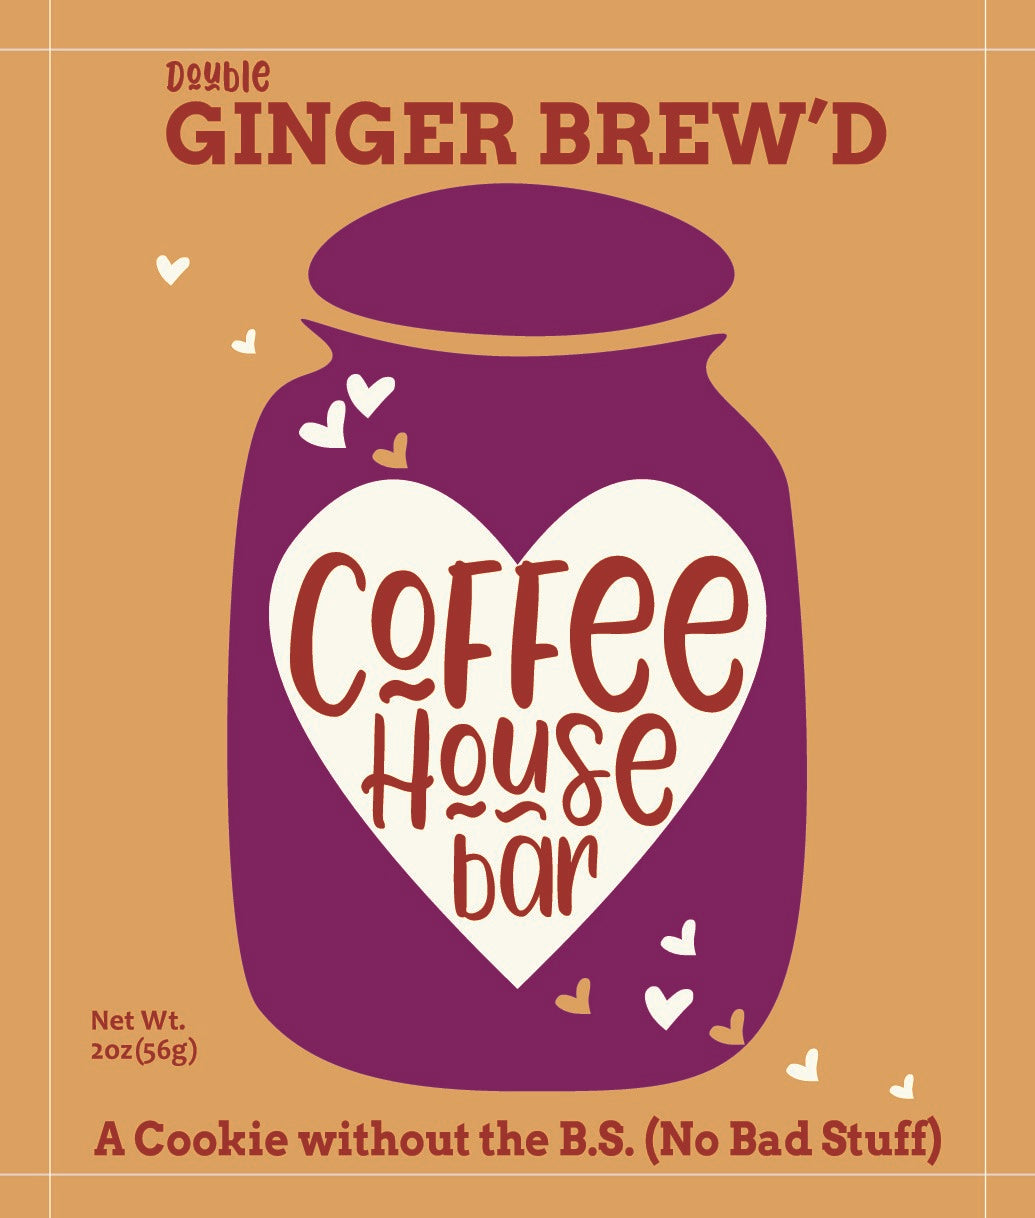 COFFEEHOUSE BAR - Ginger Brew'd (six-pack)